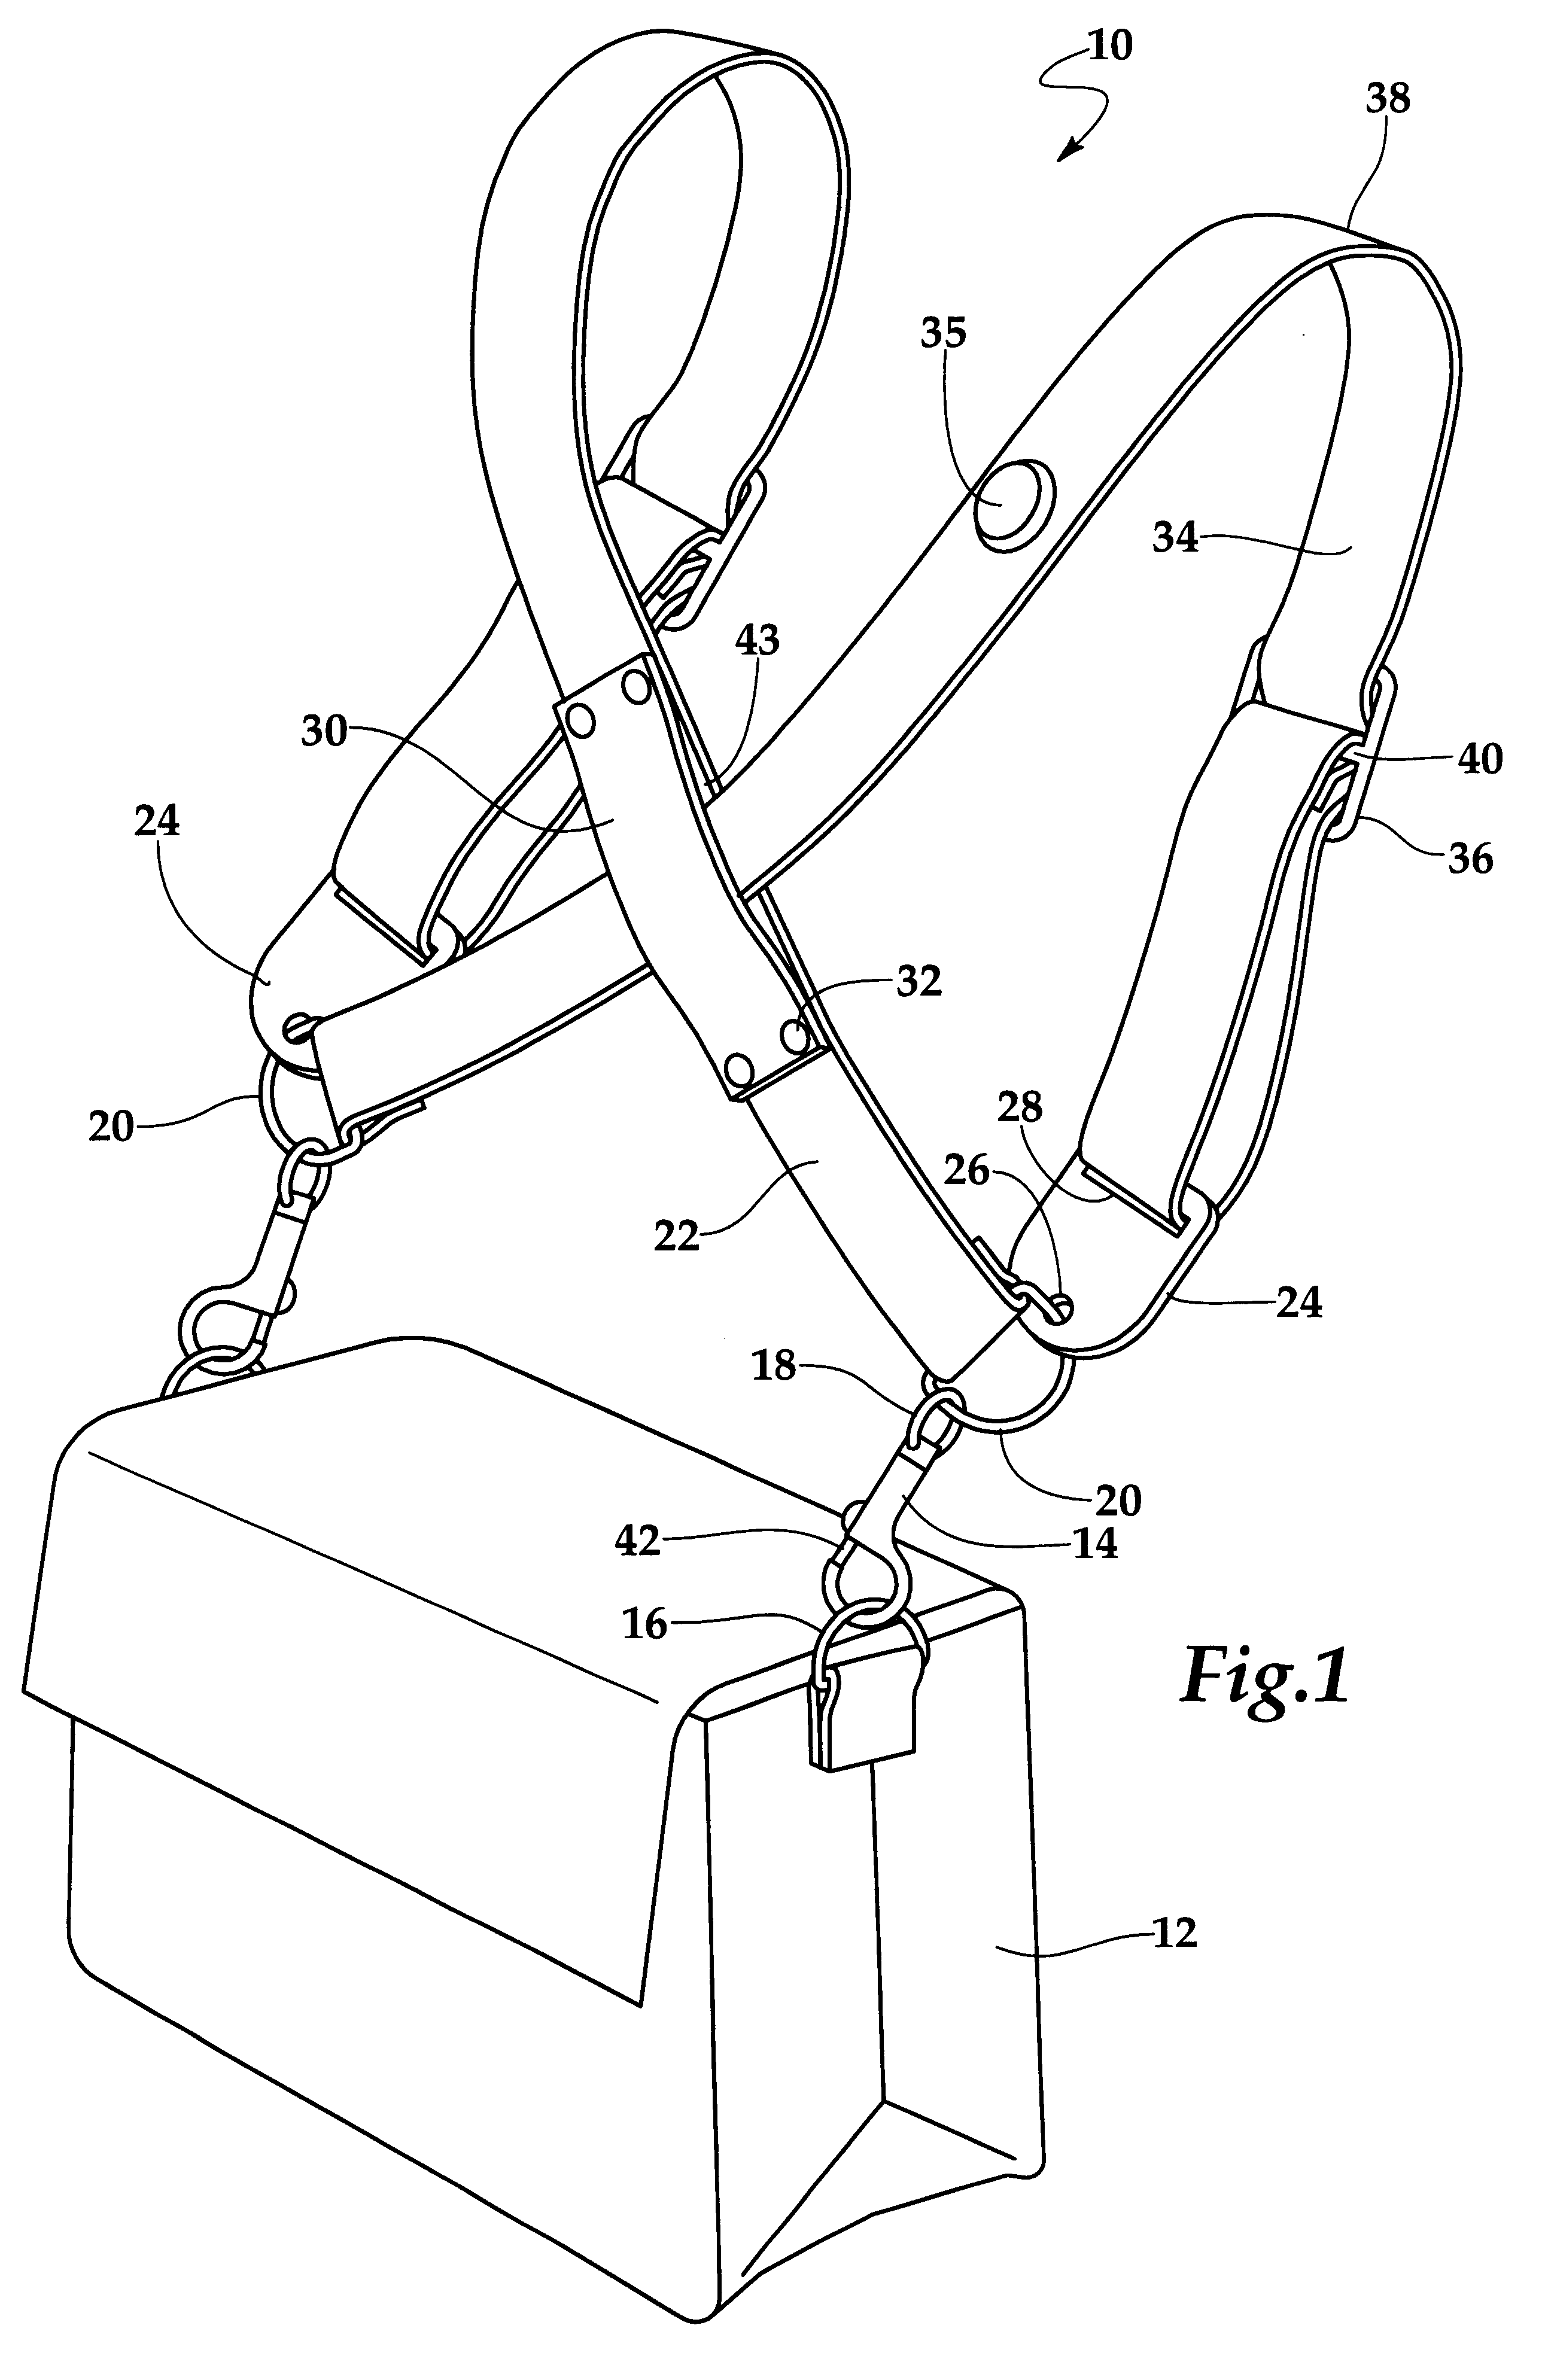 Dual strap system for conversion of bags to backpacks